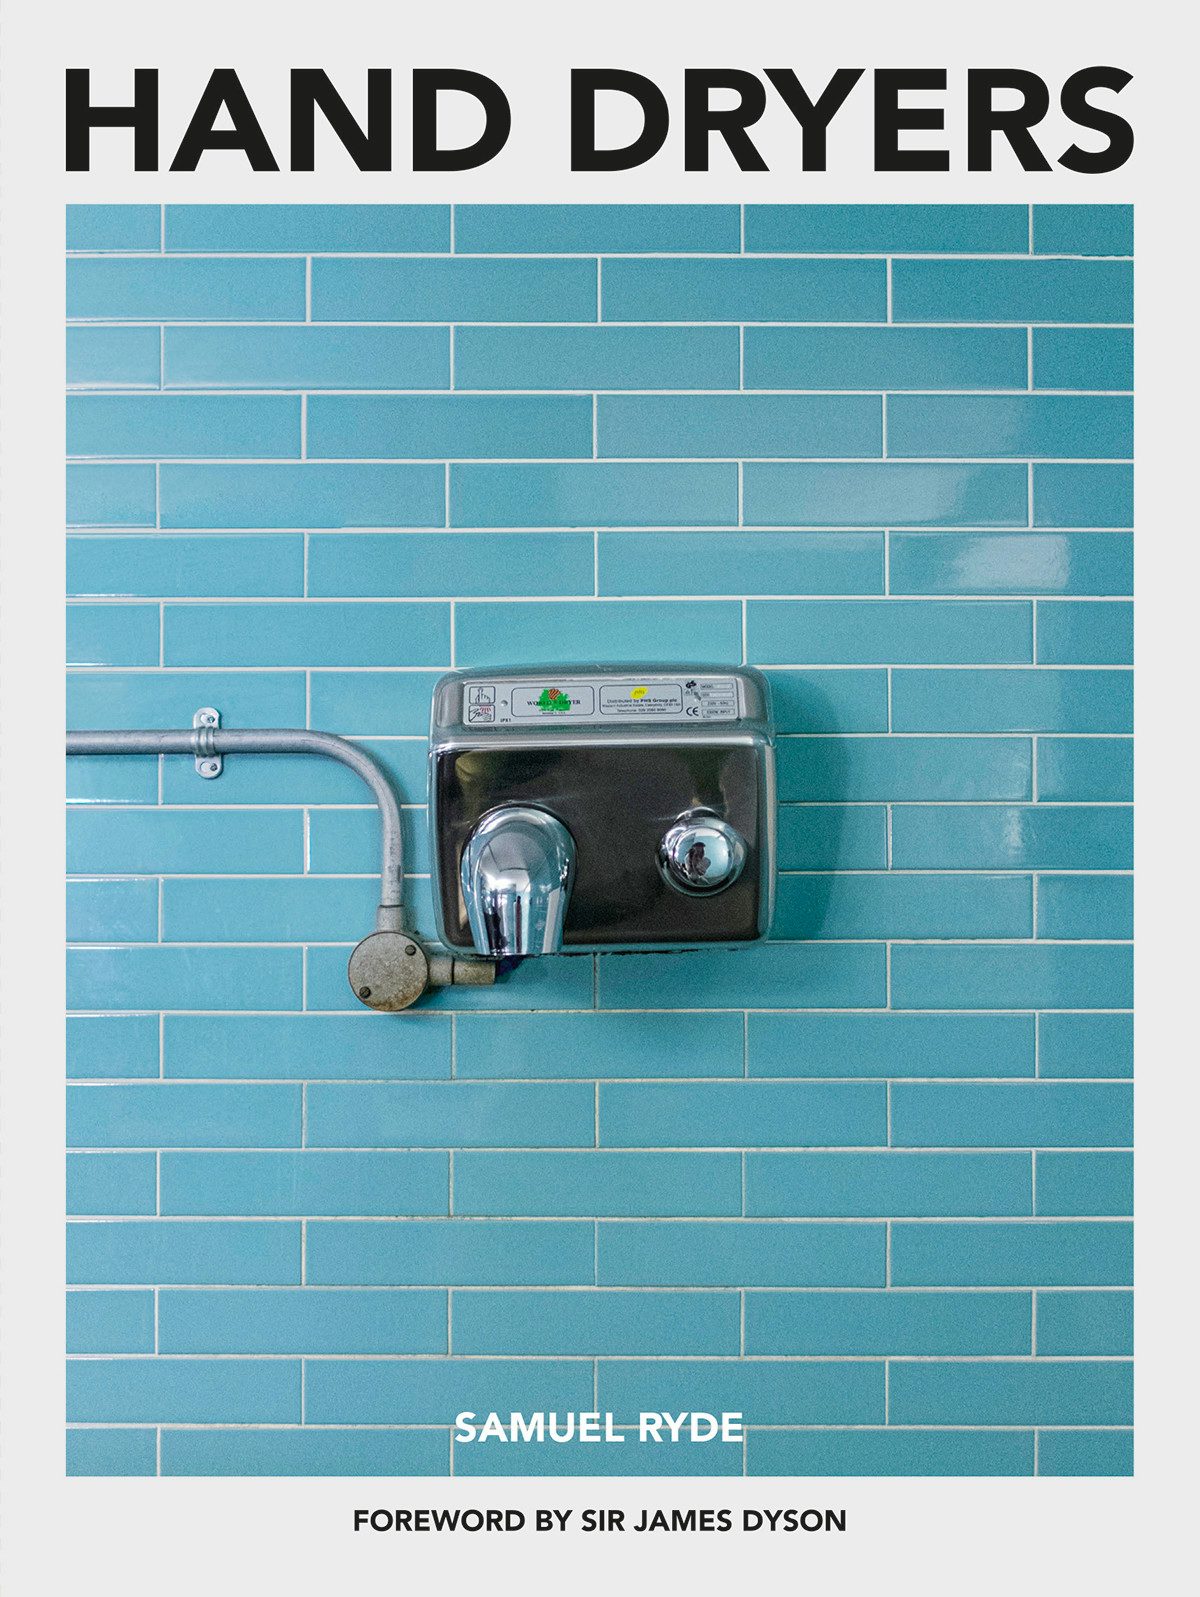 The cover of Hand Dryers, a new photo book by Samuel Ryde